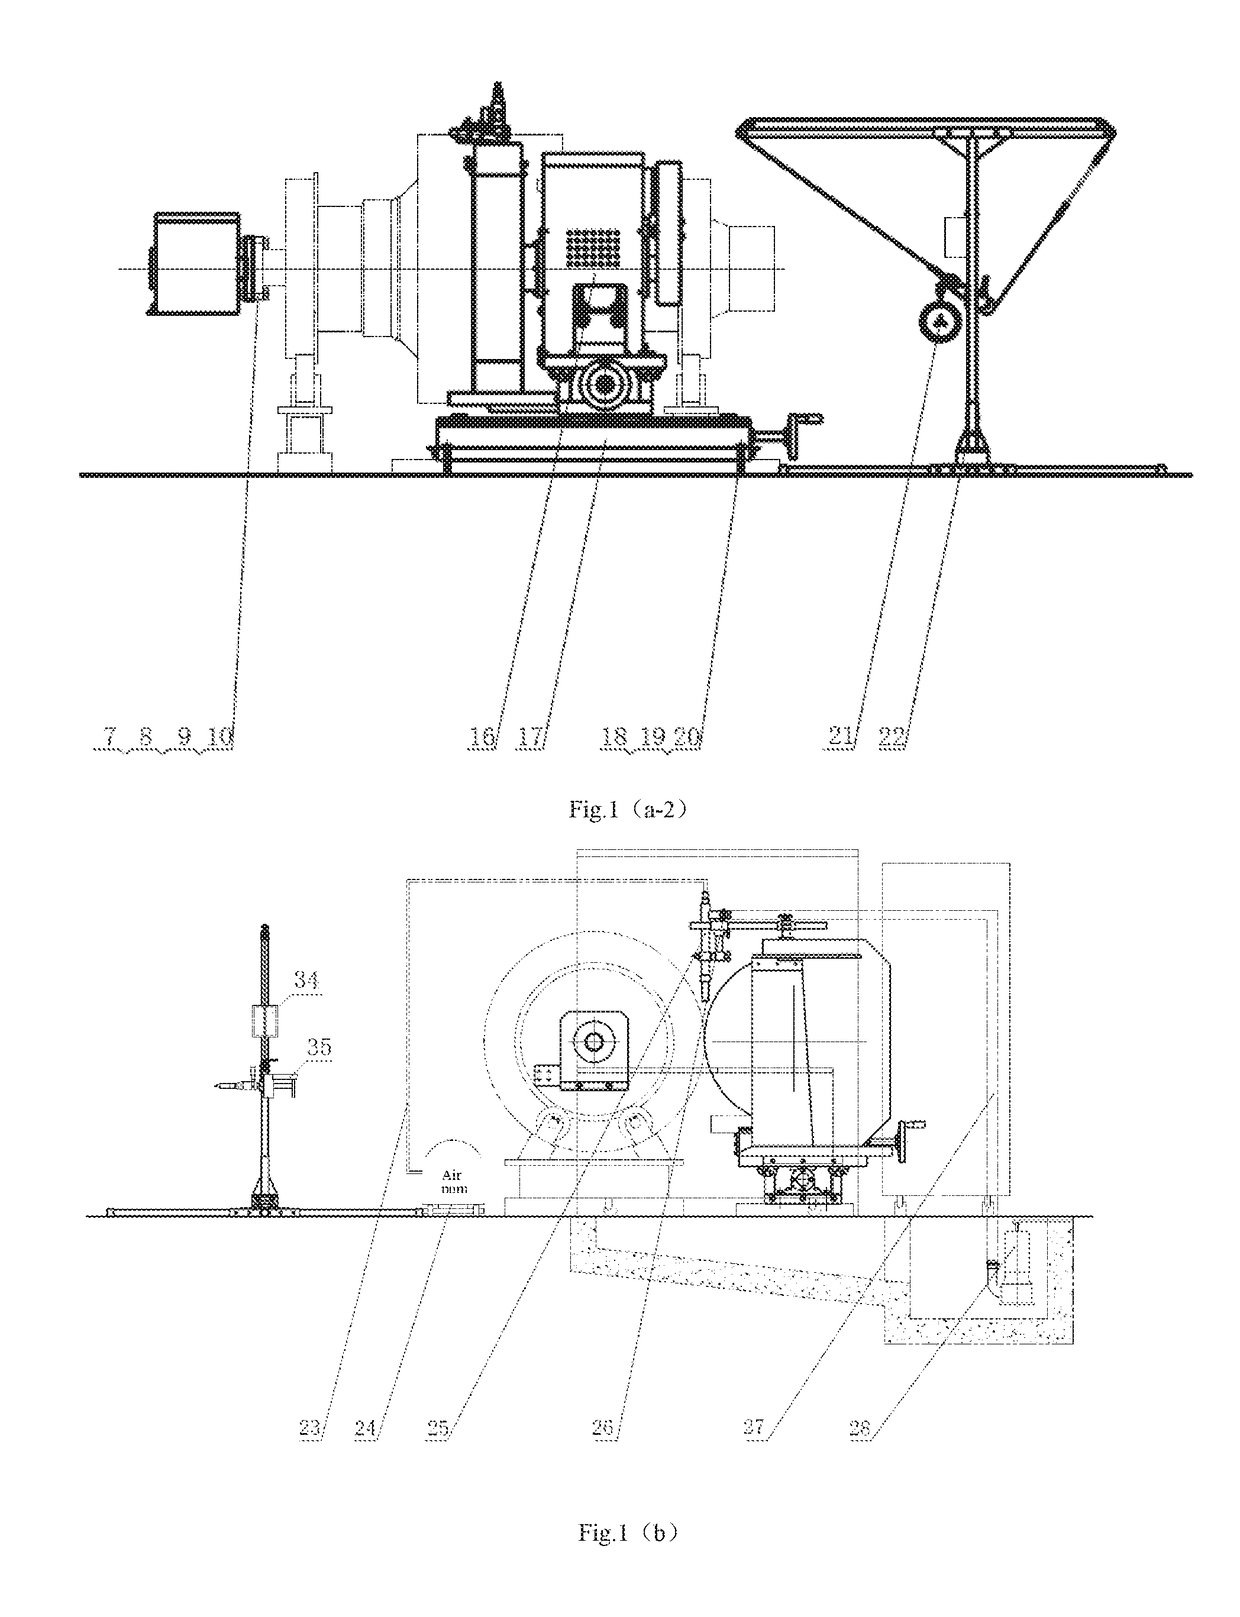 A portable short electric arc processing system